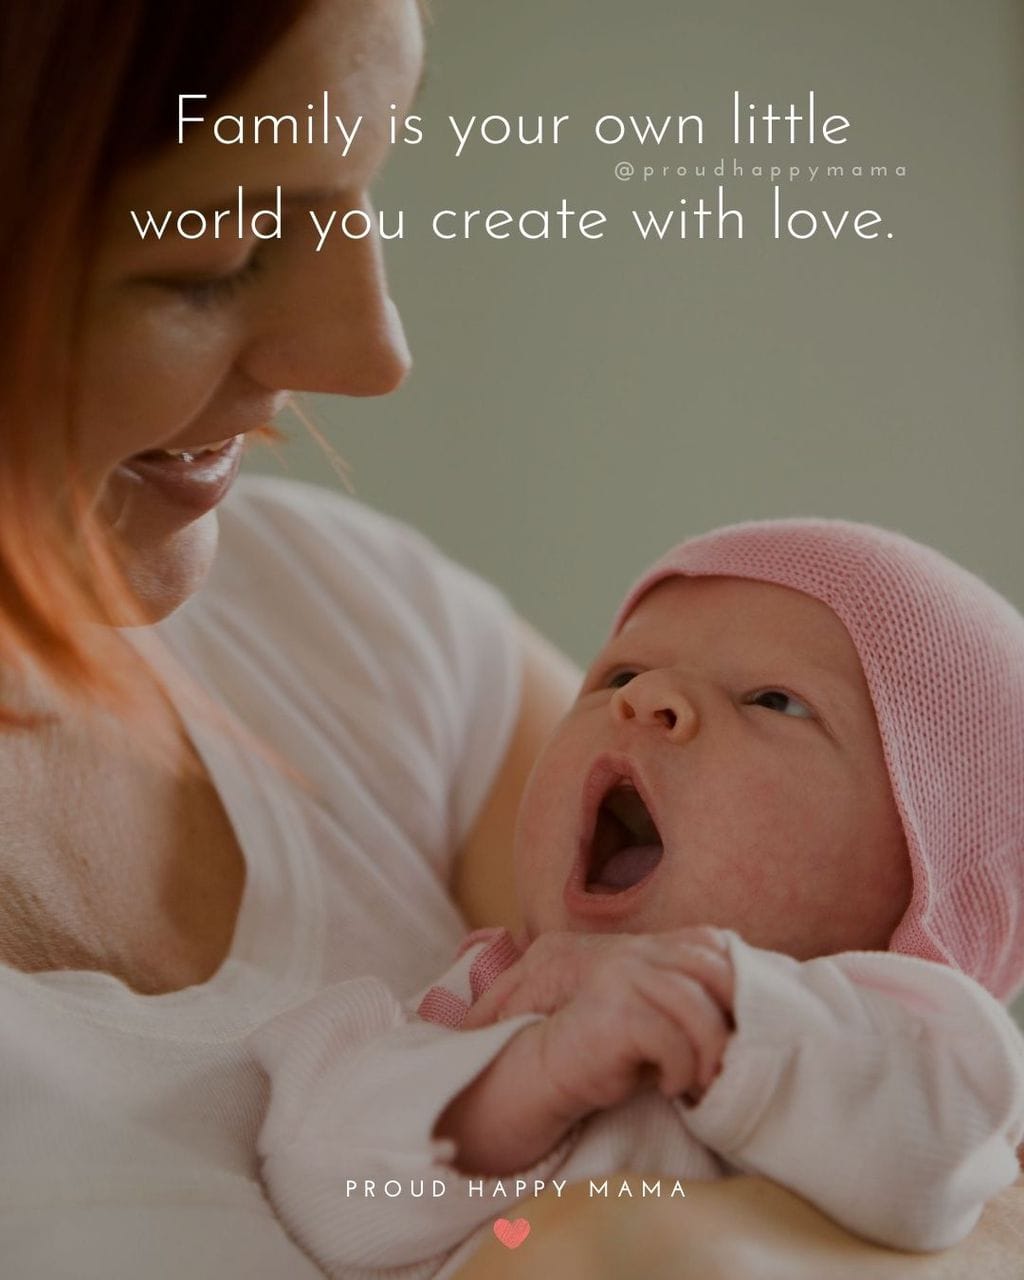 Quotes On Family Love | Family is your own little world you create with love.